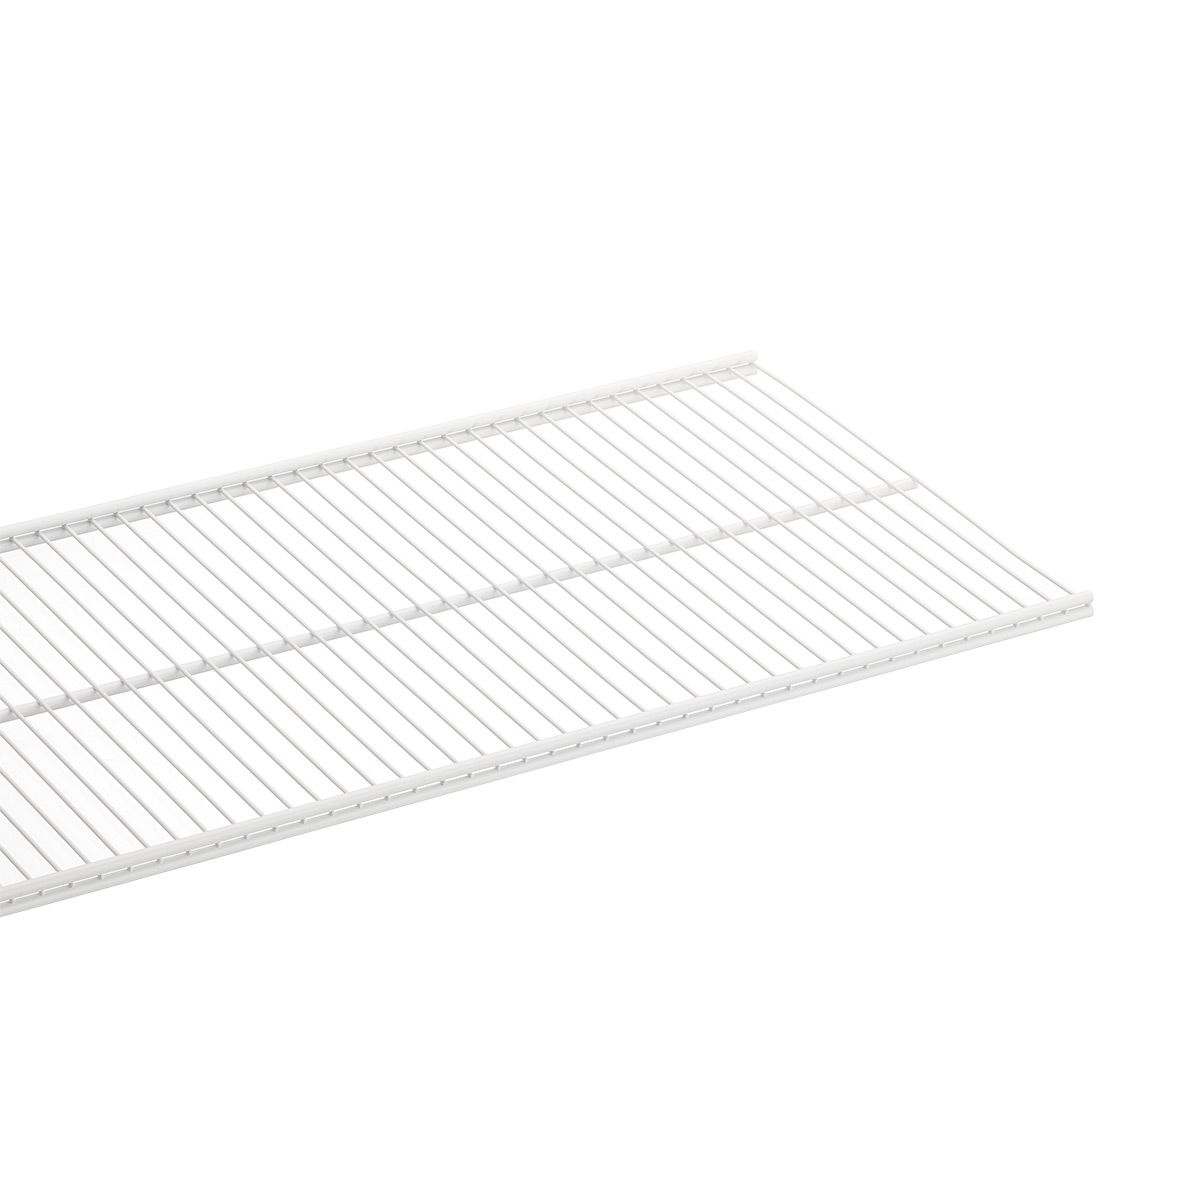 Ventilated Shelf | The Container Store